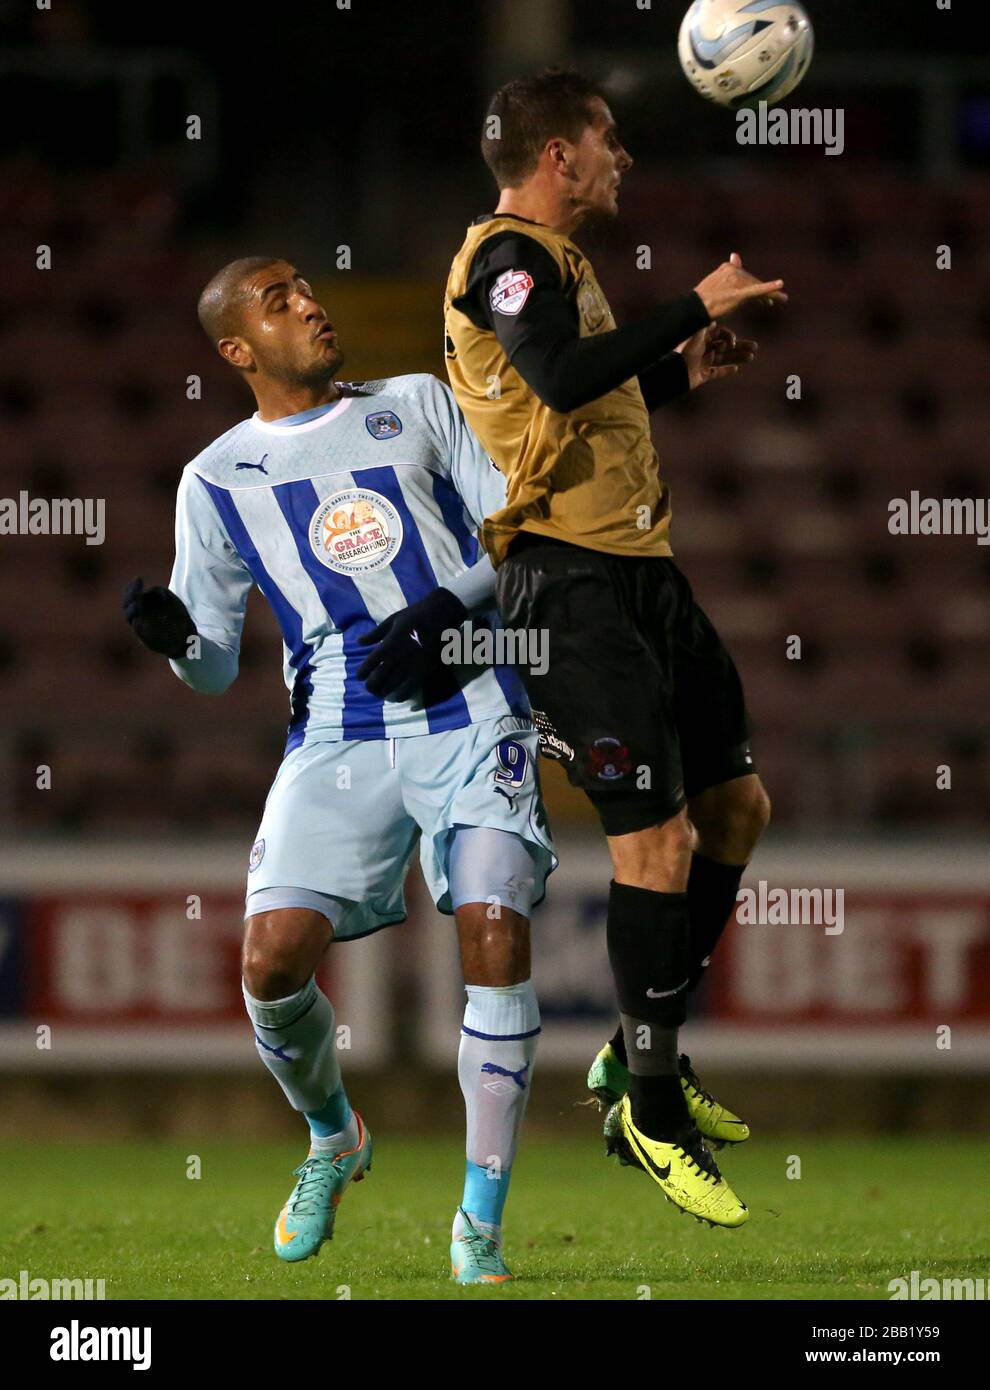 Coventry City's Leon Clarke and Leyton Orient's Dean Cox (right) battle for the ball in the air Stock Photo